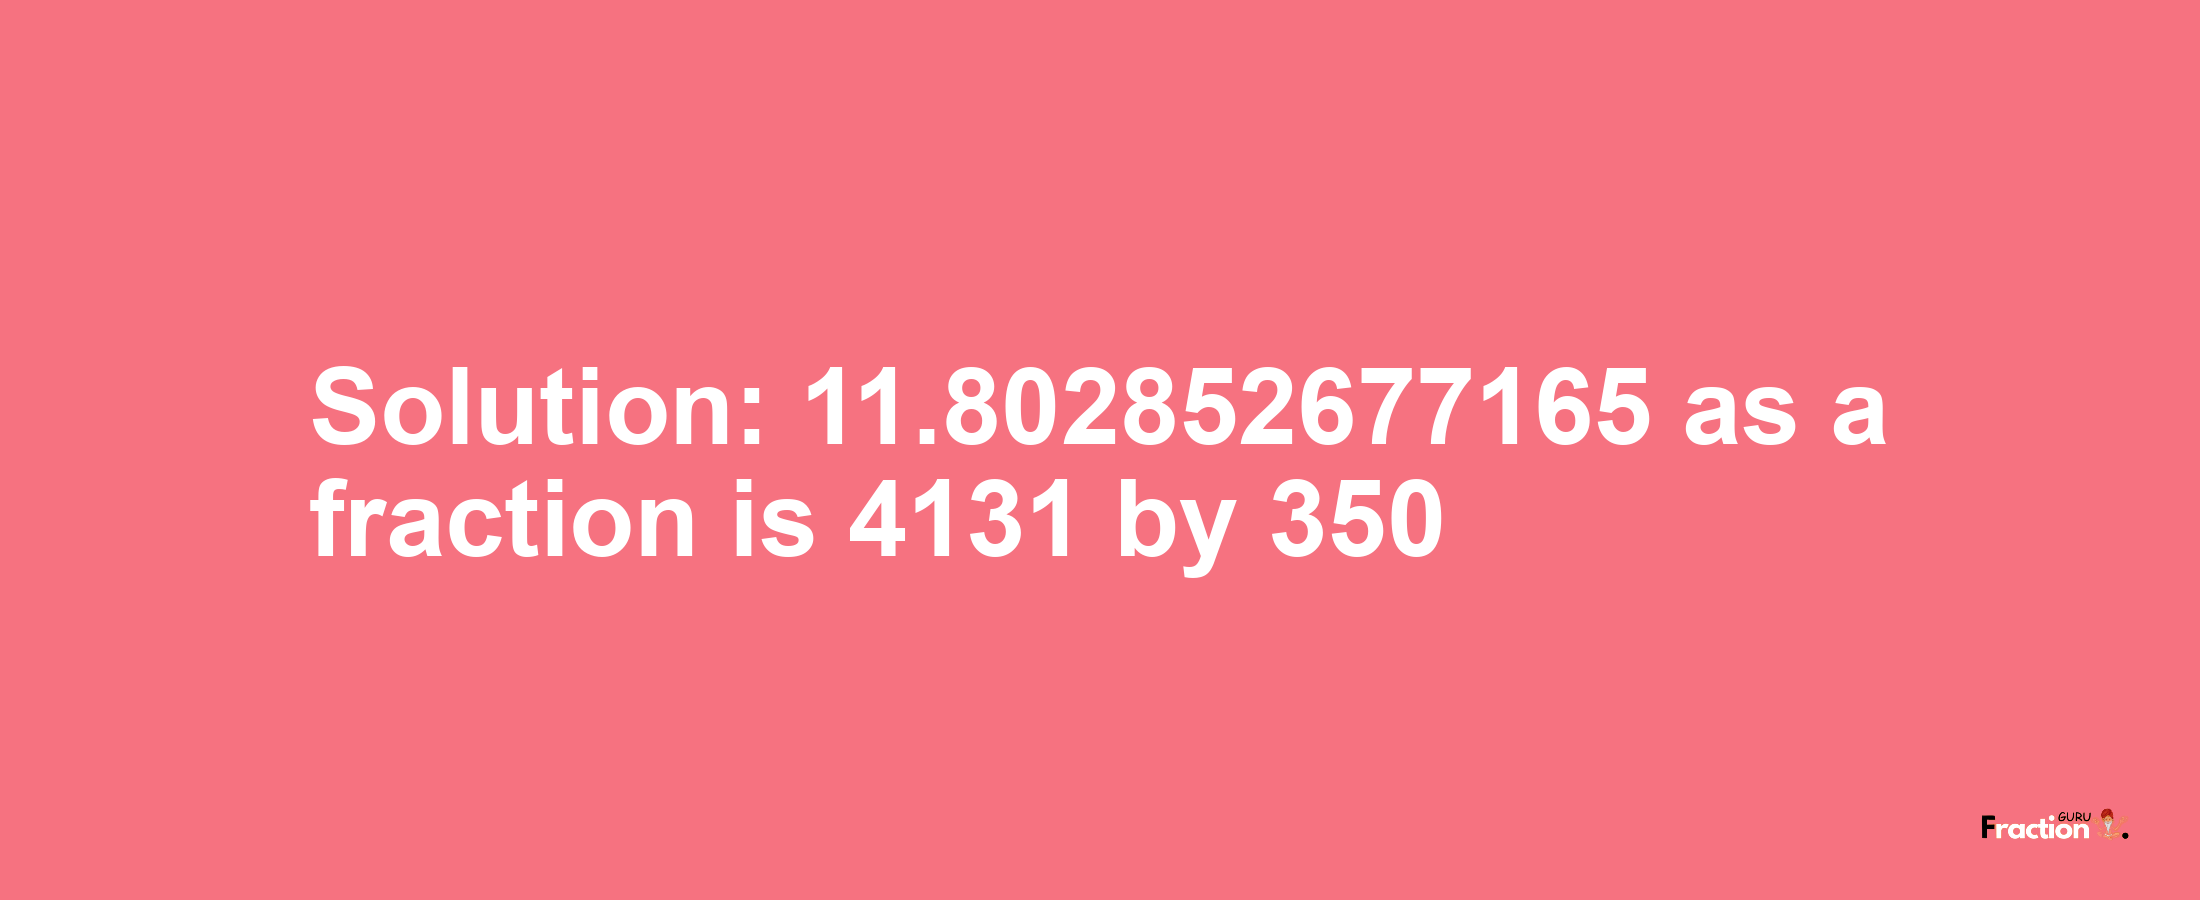 Solution:11.802852677165 as a fraction is 4131/350